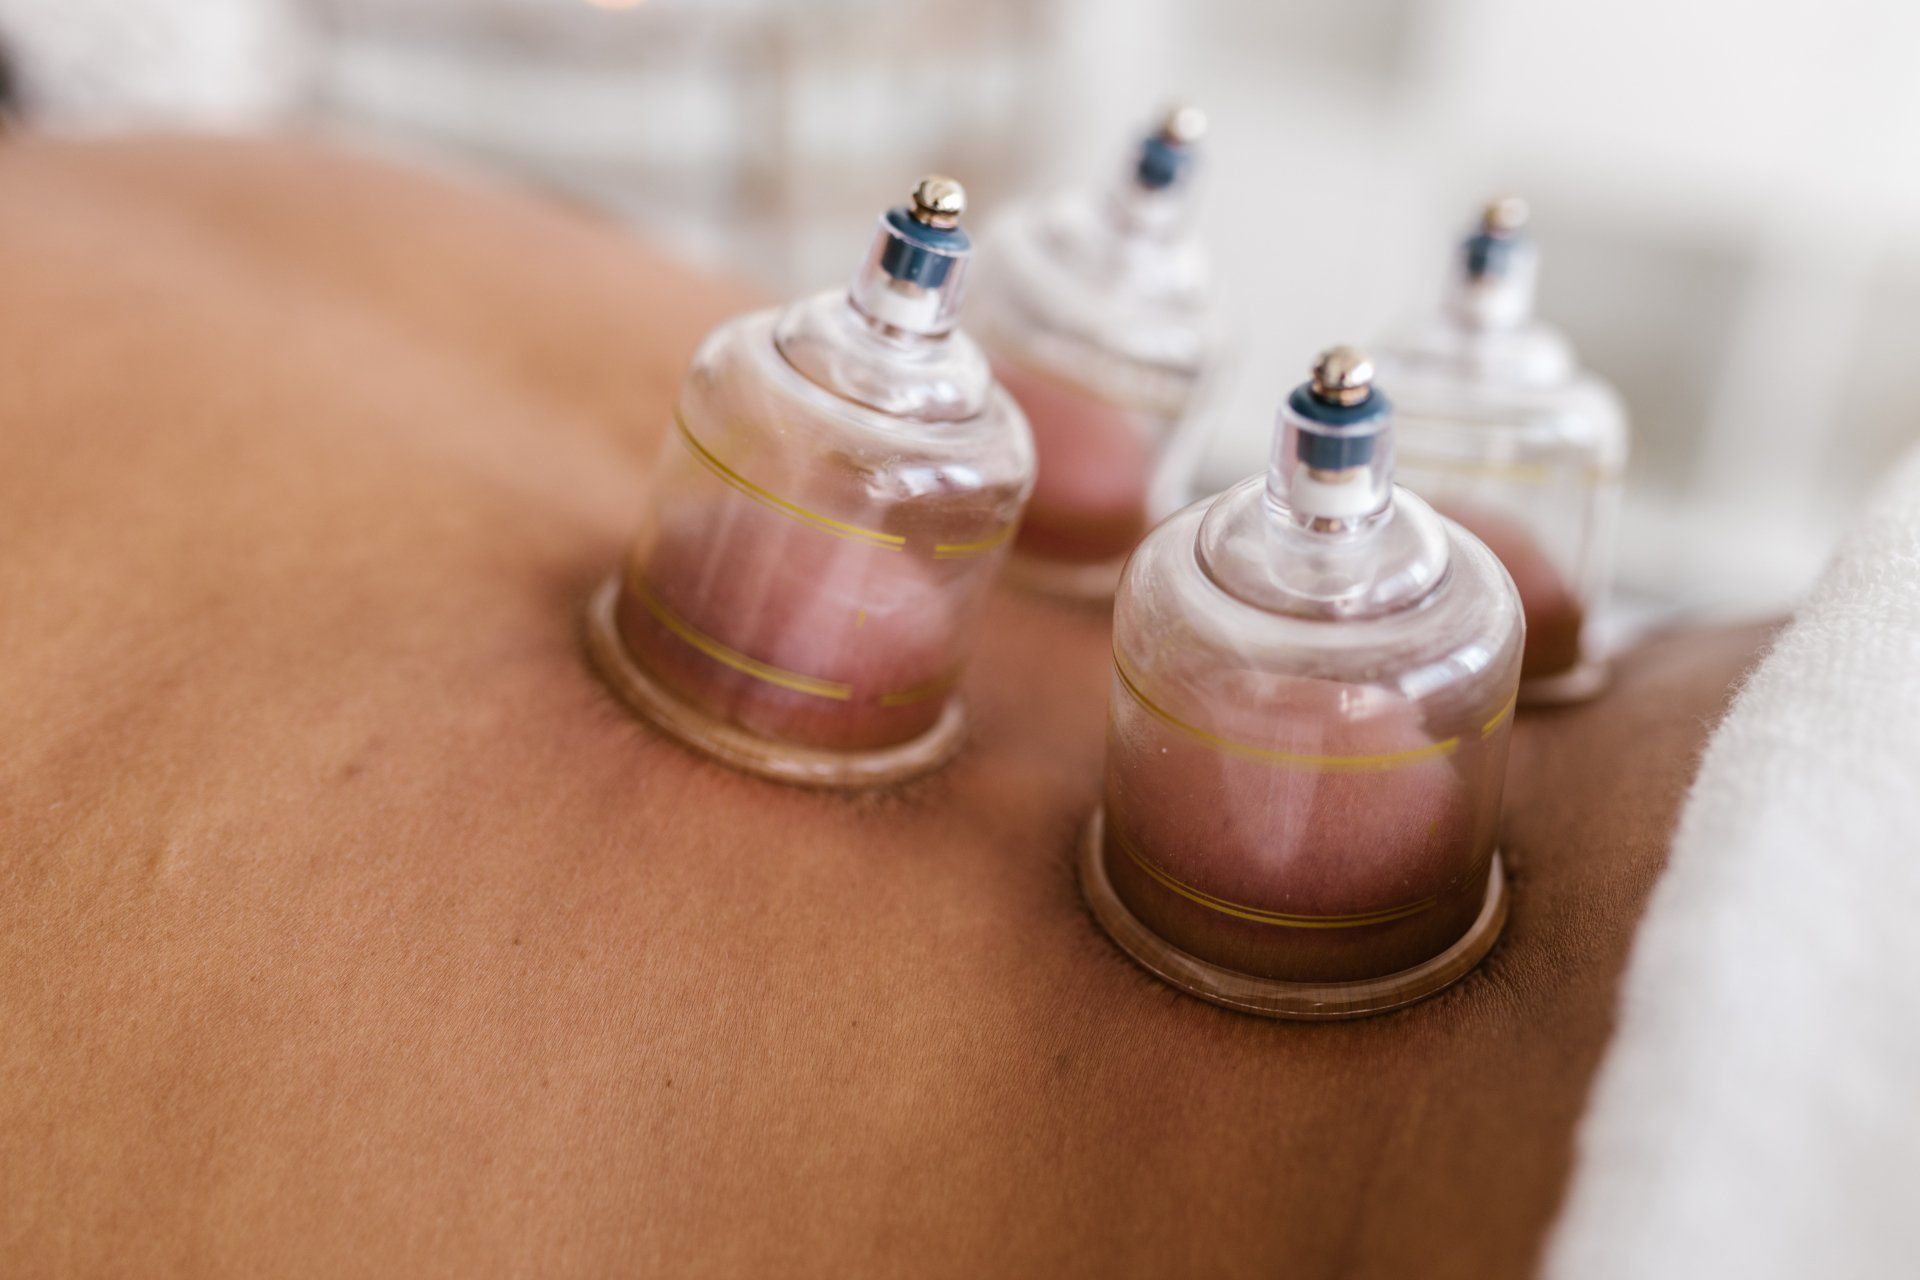 static and dynamic cupping